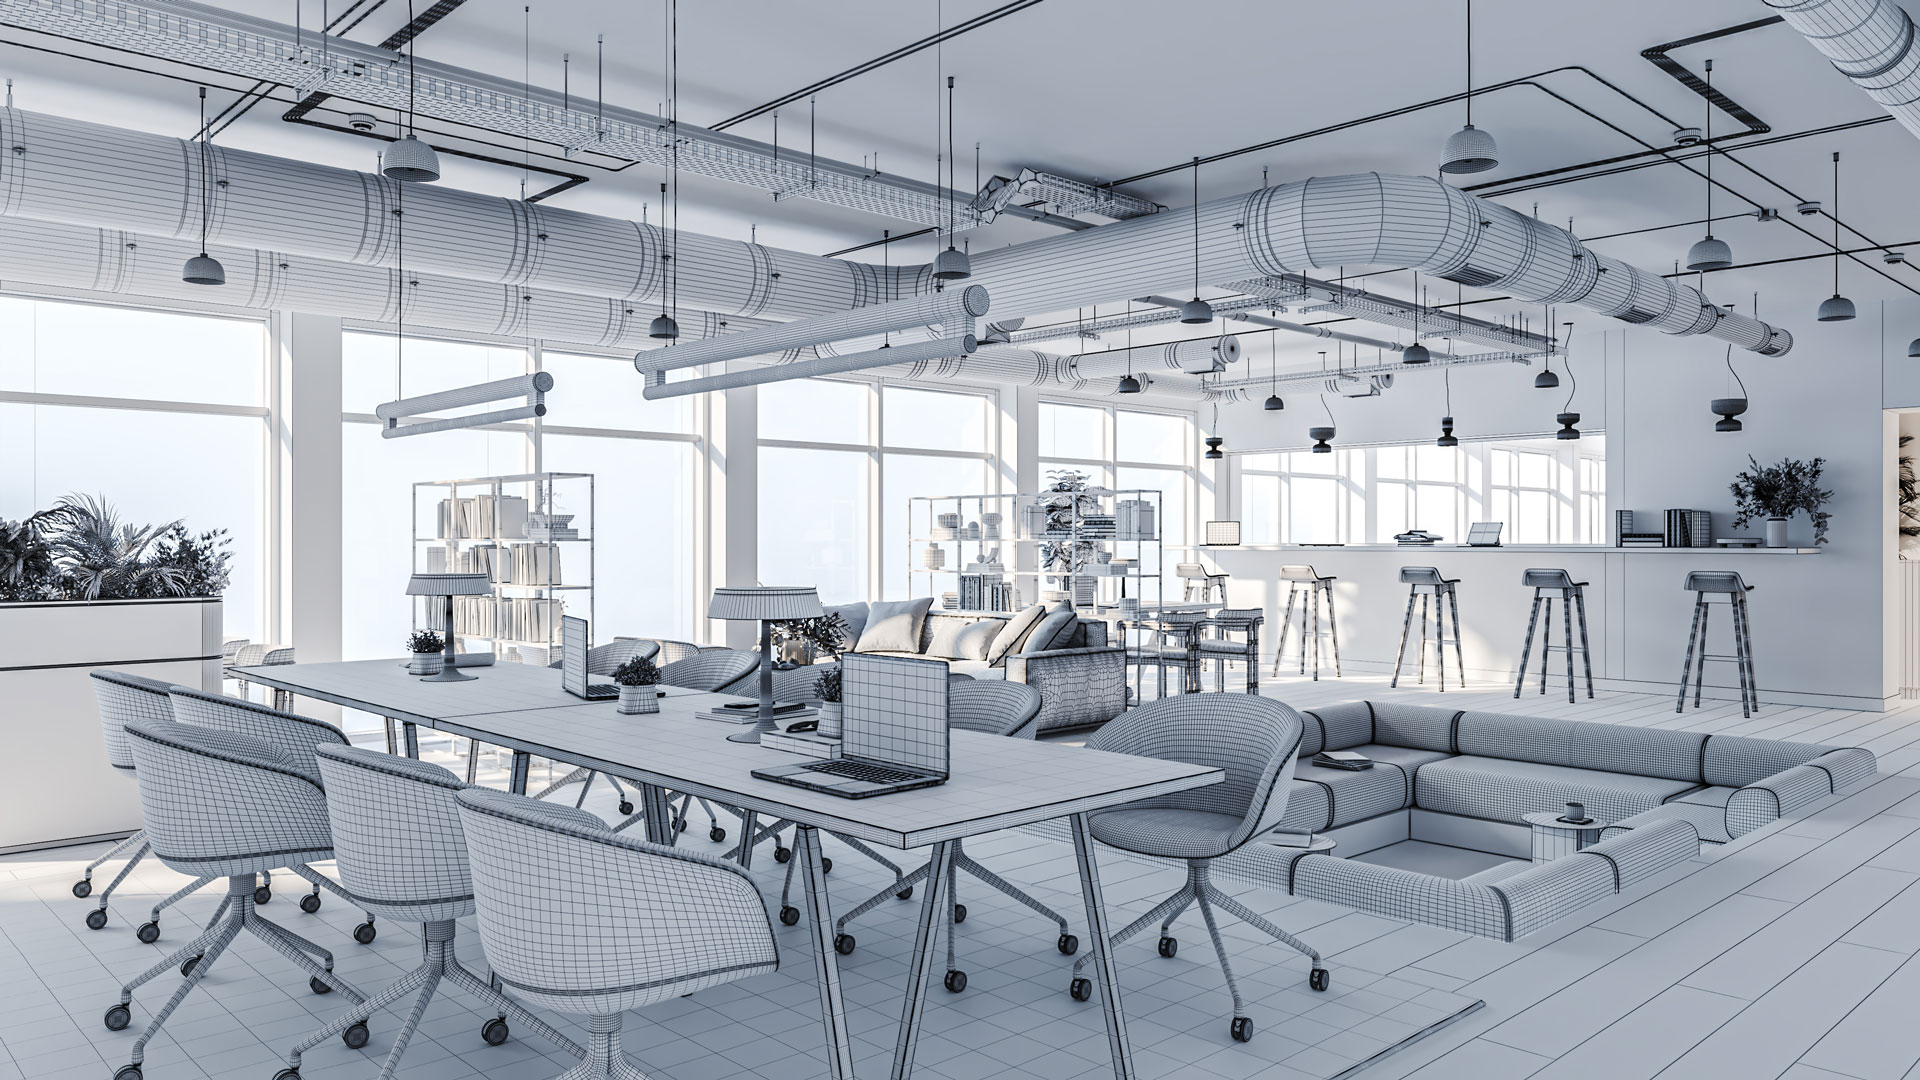 Grayscale Visualization for an Office Interior